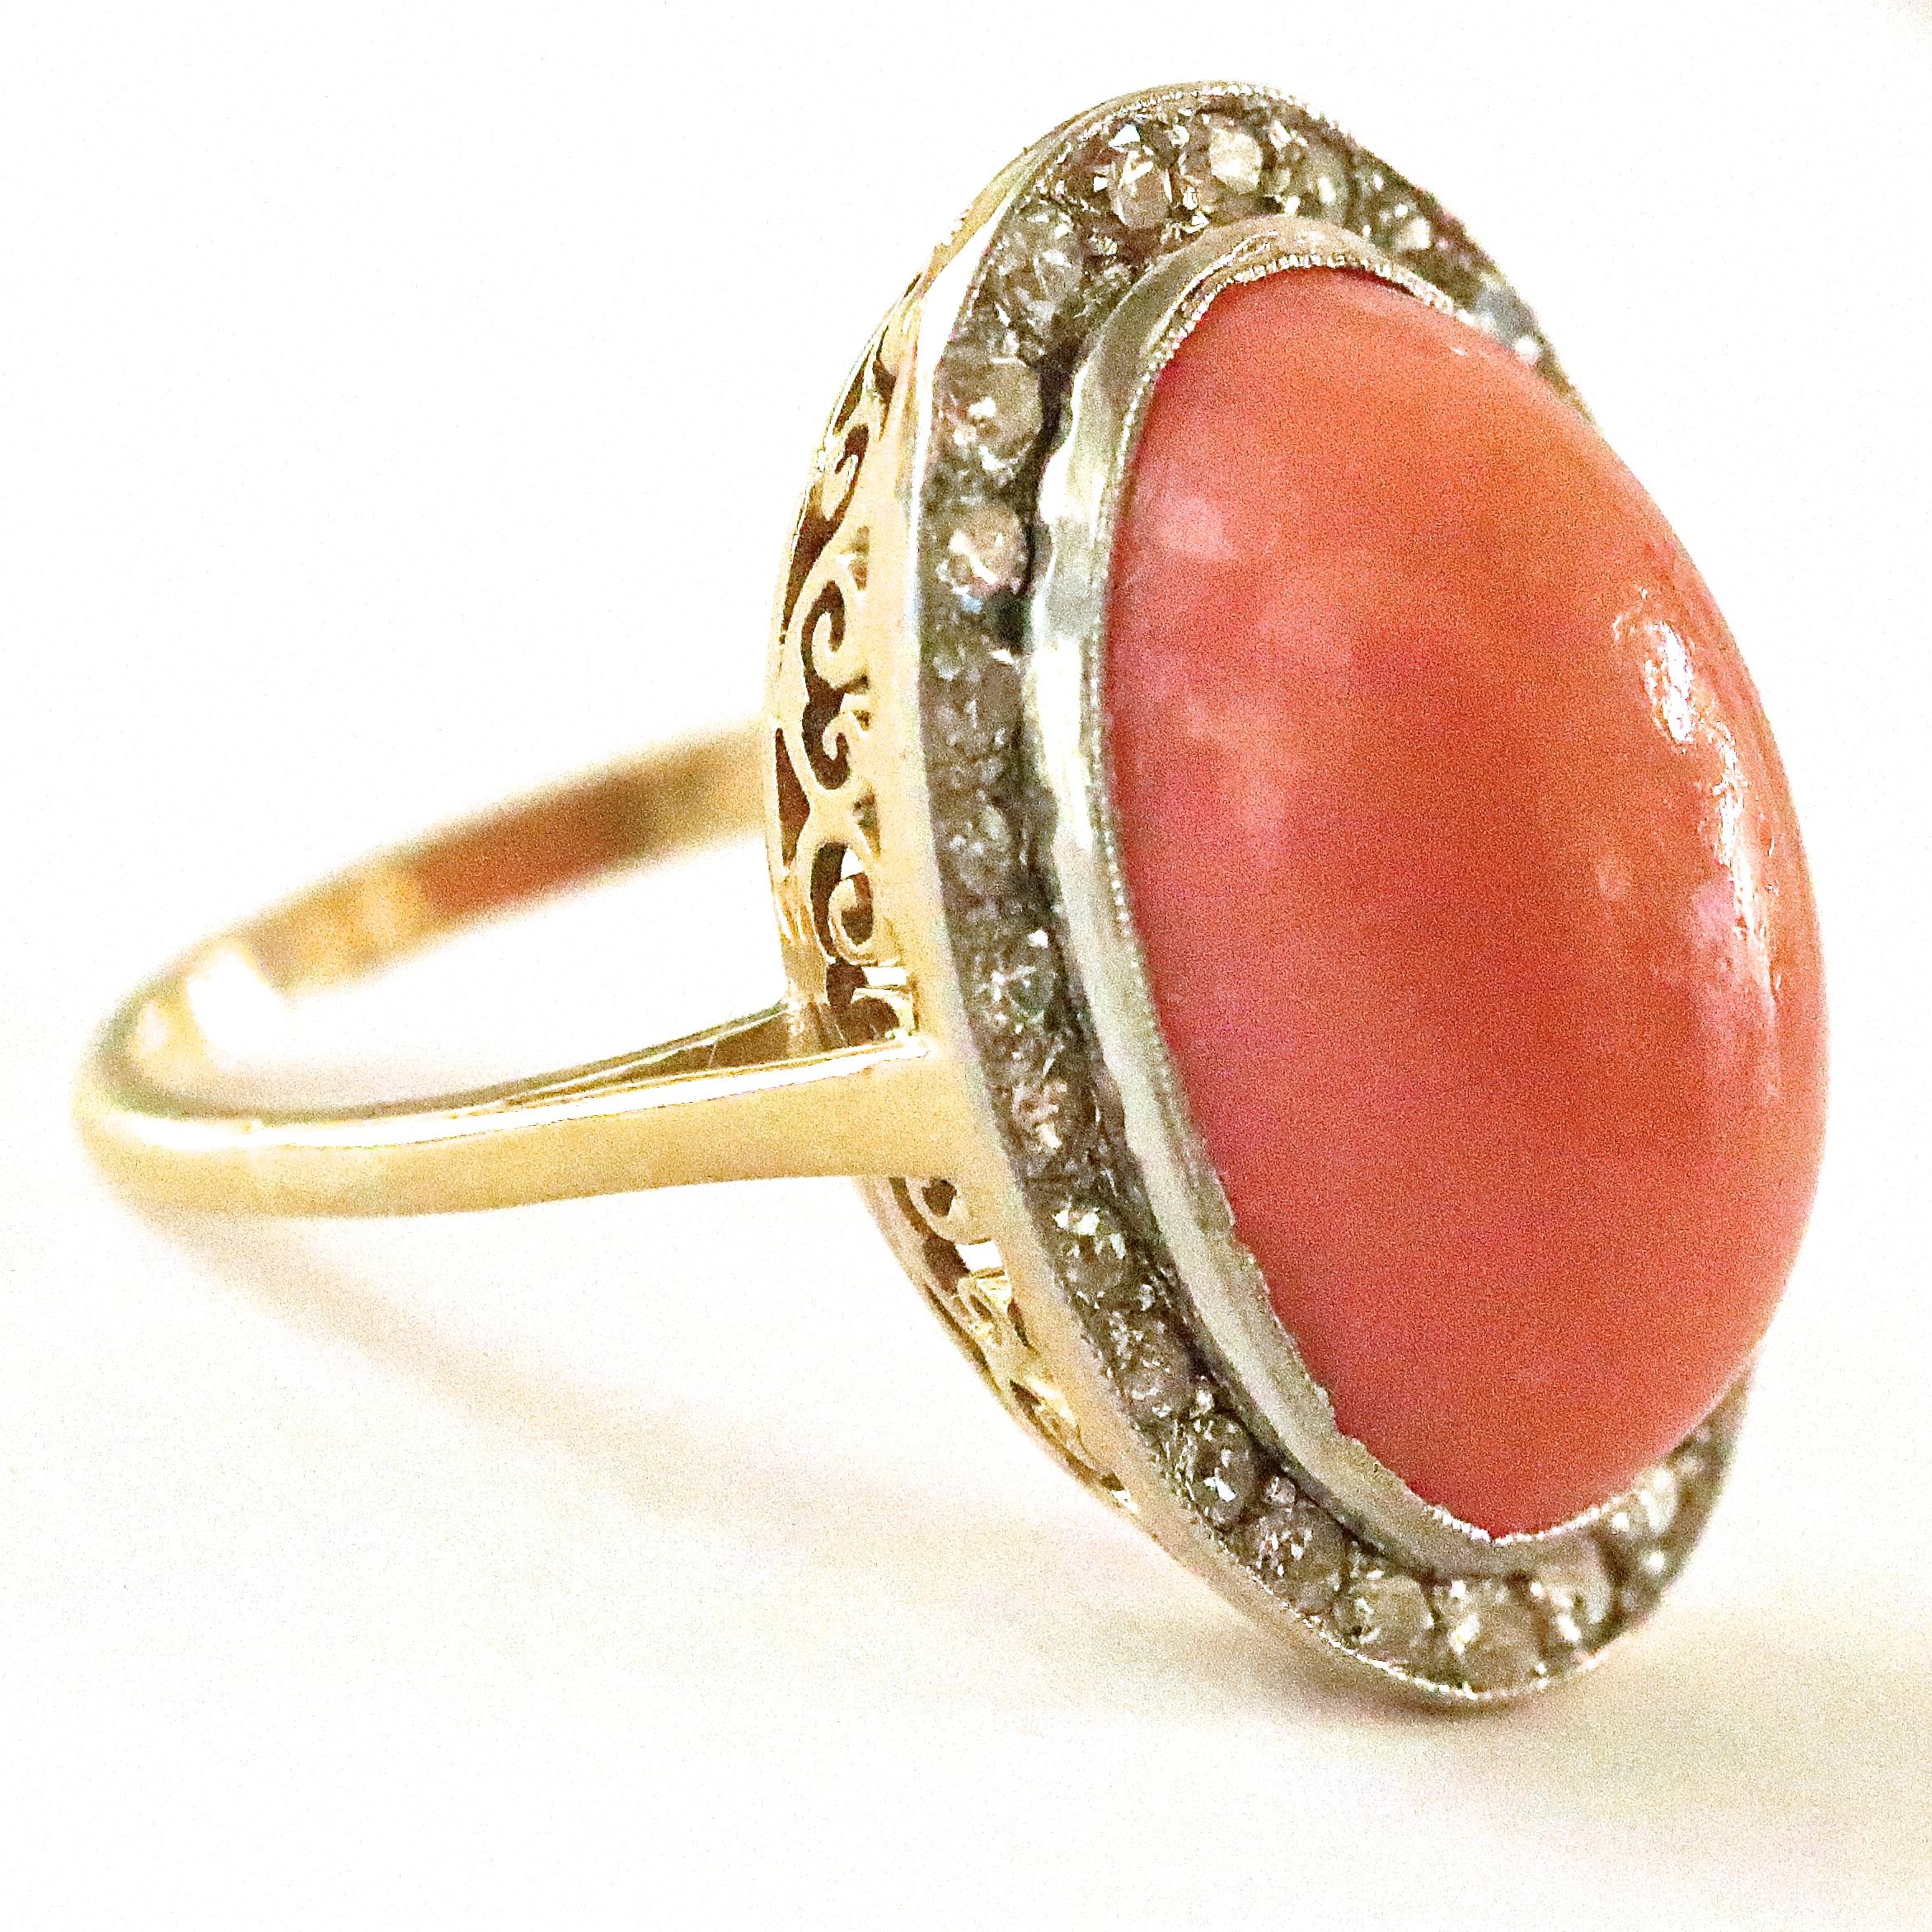 The Art Deco period was a time of advancement, symmetry and fun! This beautiful Art Deco Inspired Coral Diamond 18k gold Cluster Ring is perfect for a night out. The center stone is a cabochon coral approximately 10.00 carats. Highlighted by 28